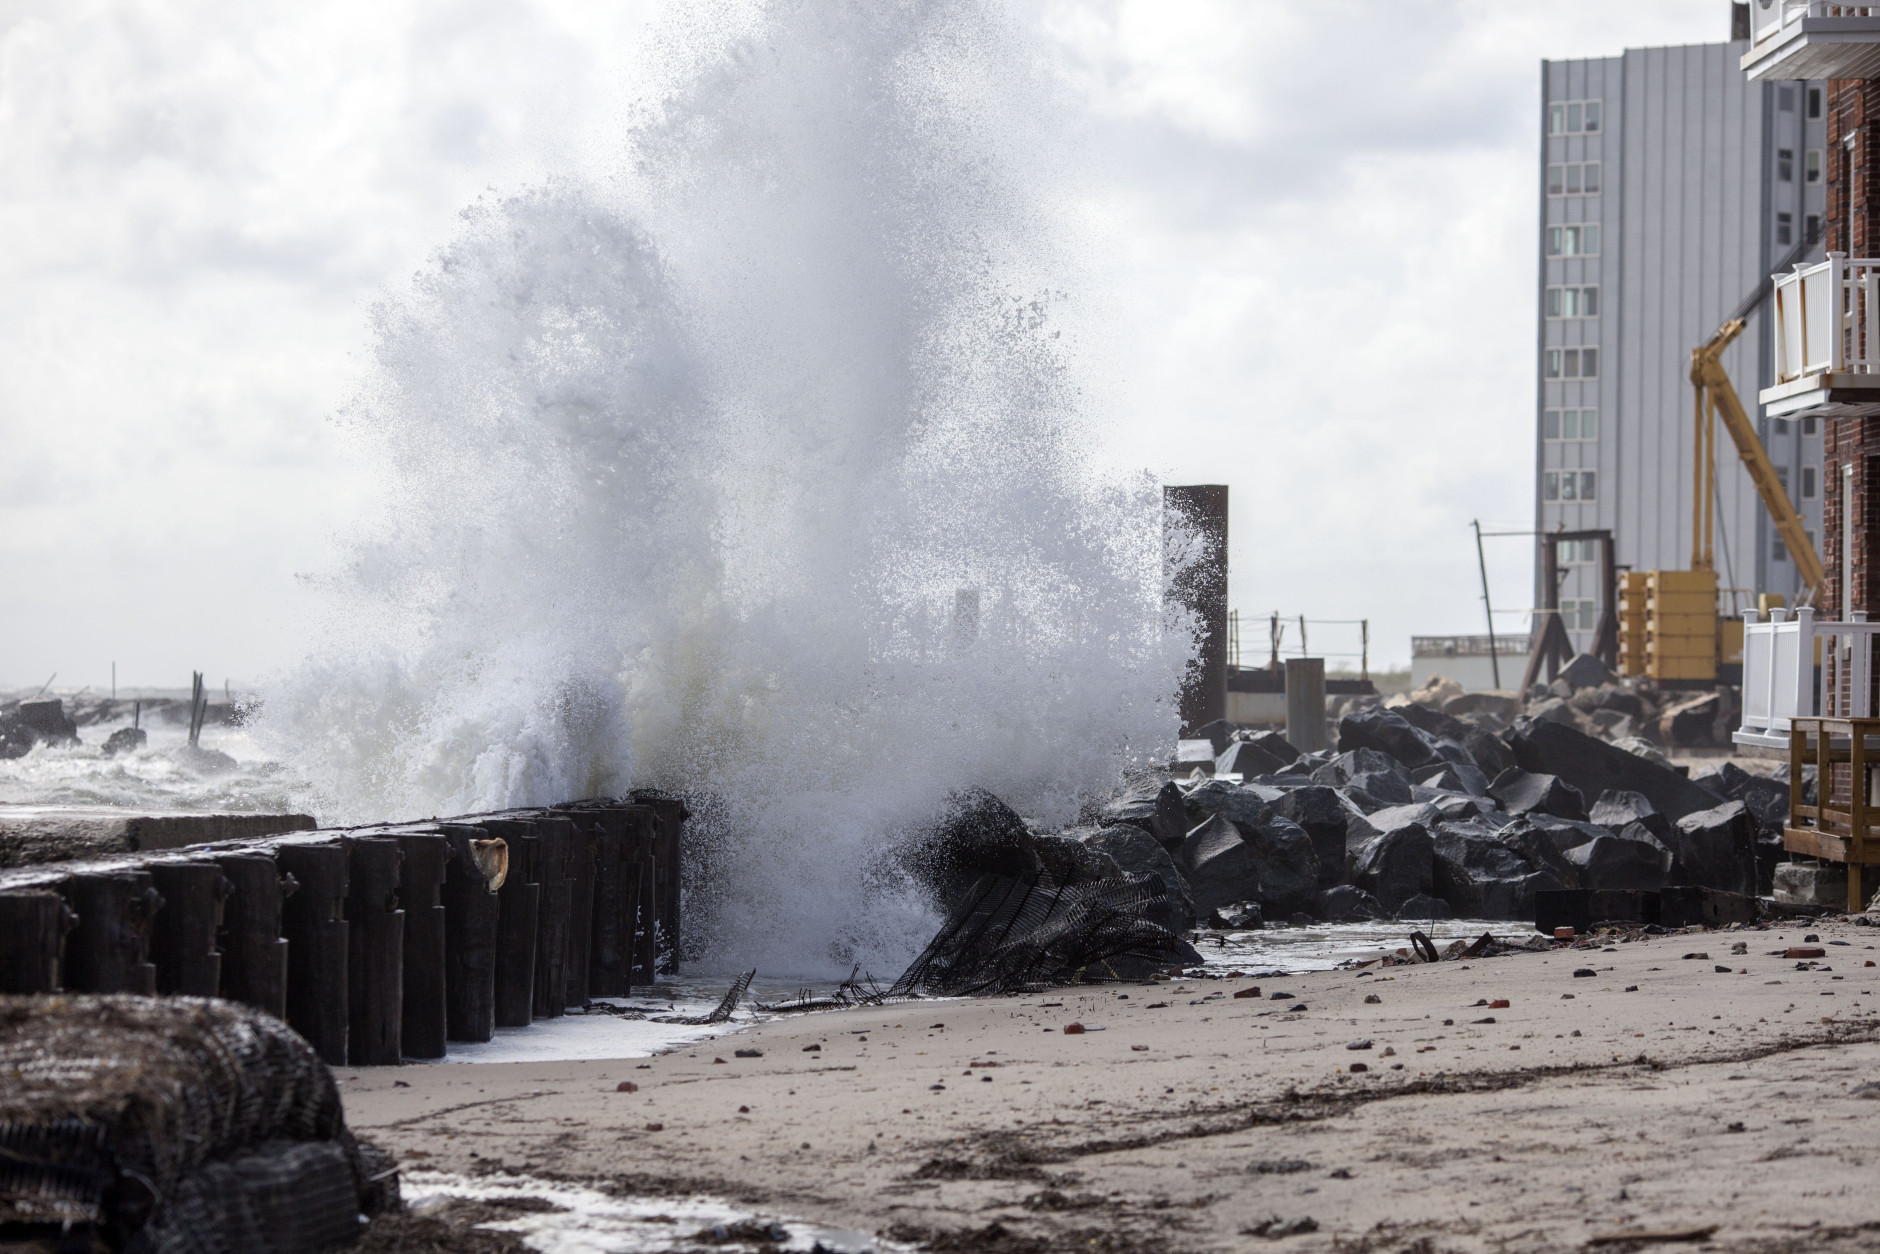 ATLANTIC CITY, NJ - SEPTEMBER 4: High winds from tropical storm Hermine make their way north and effects can be seen as waves crash into shore on September 4, 2016 in Atlantic City, New Jersey. Hermine made landfall as a Category 1 hurricane but has weakened back to a tropical storm. (Photo by Jessica Kourkounis/Getty Images)